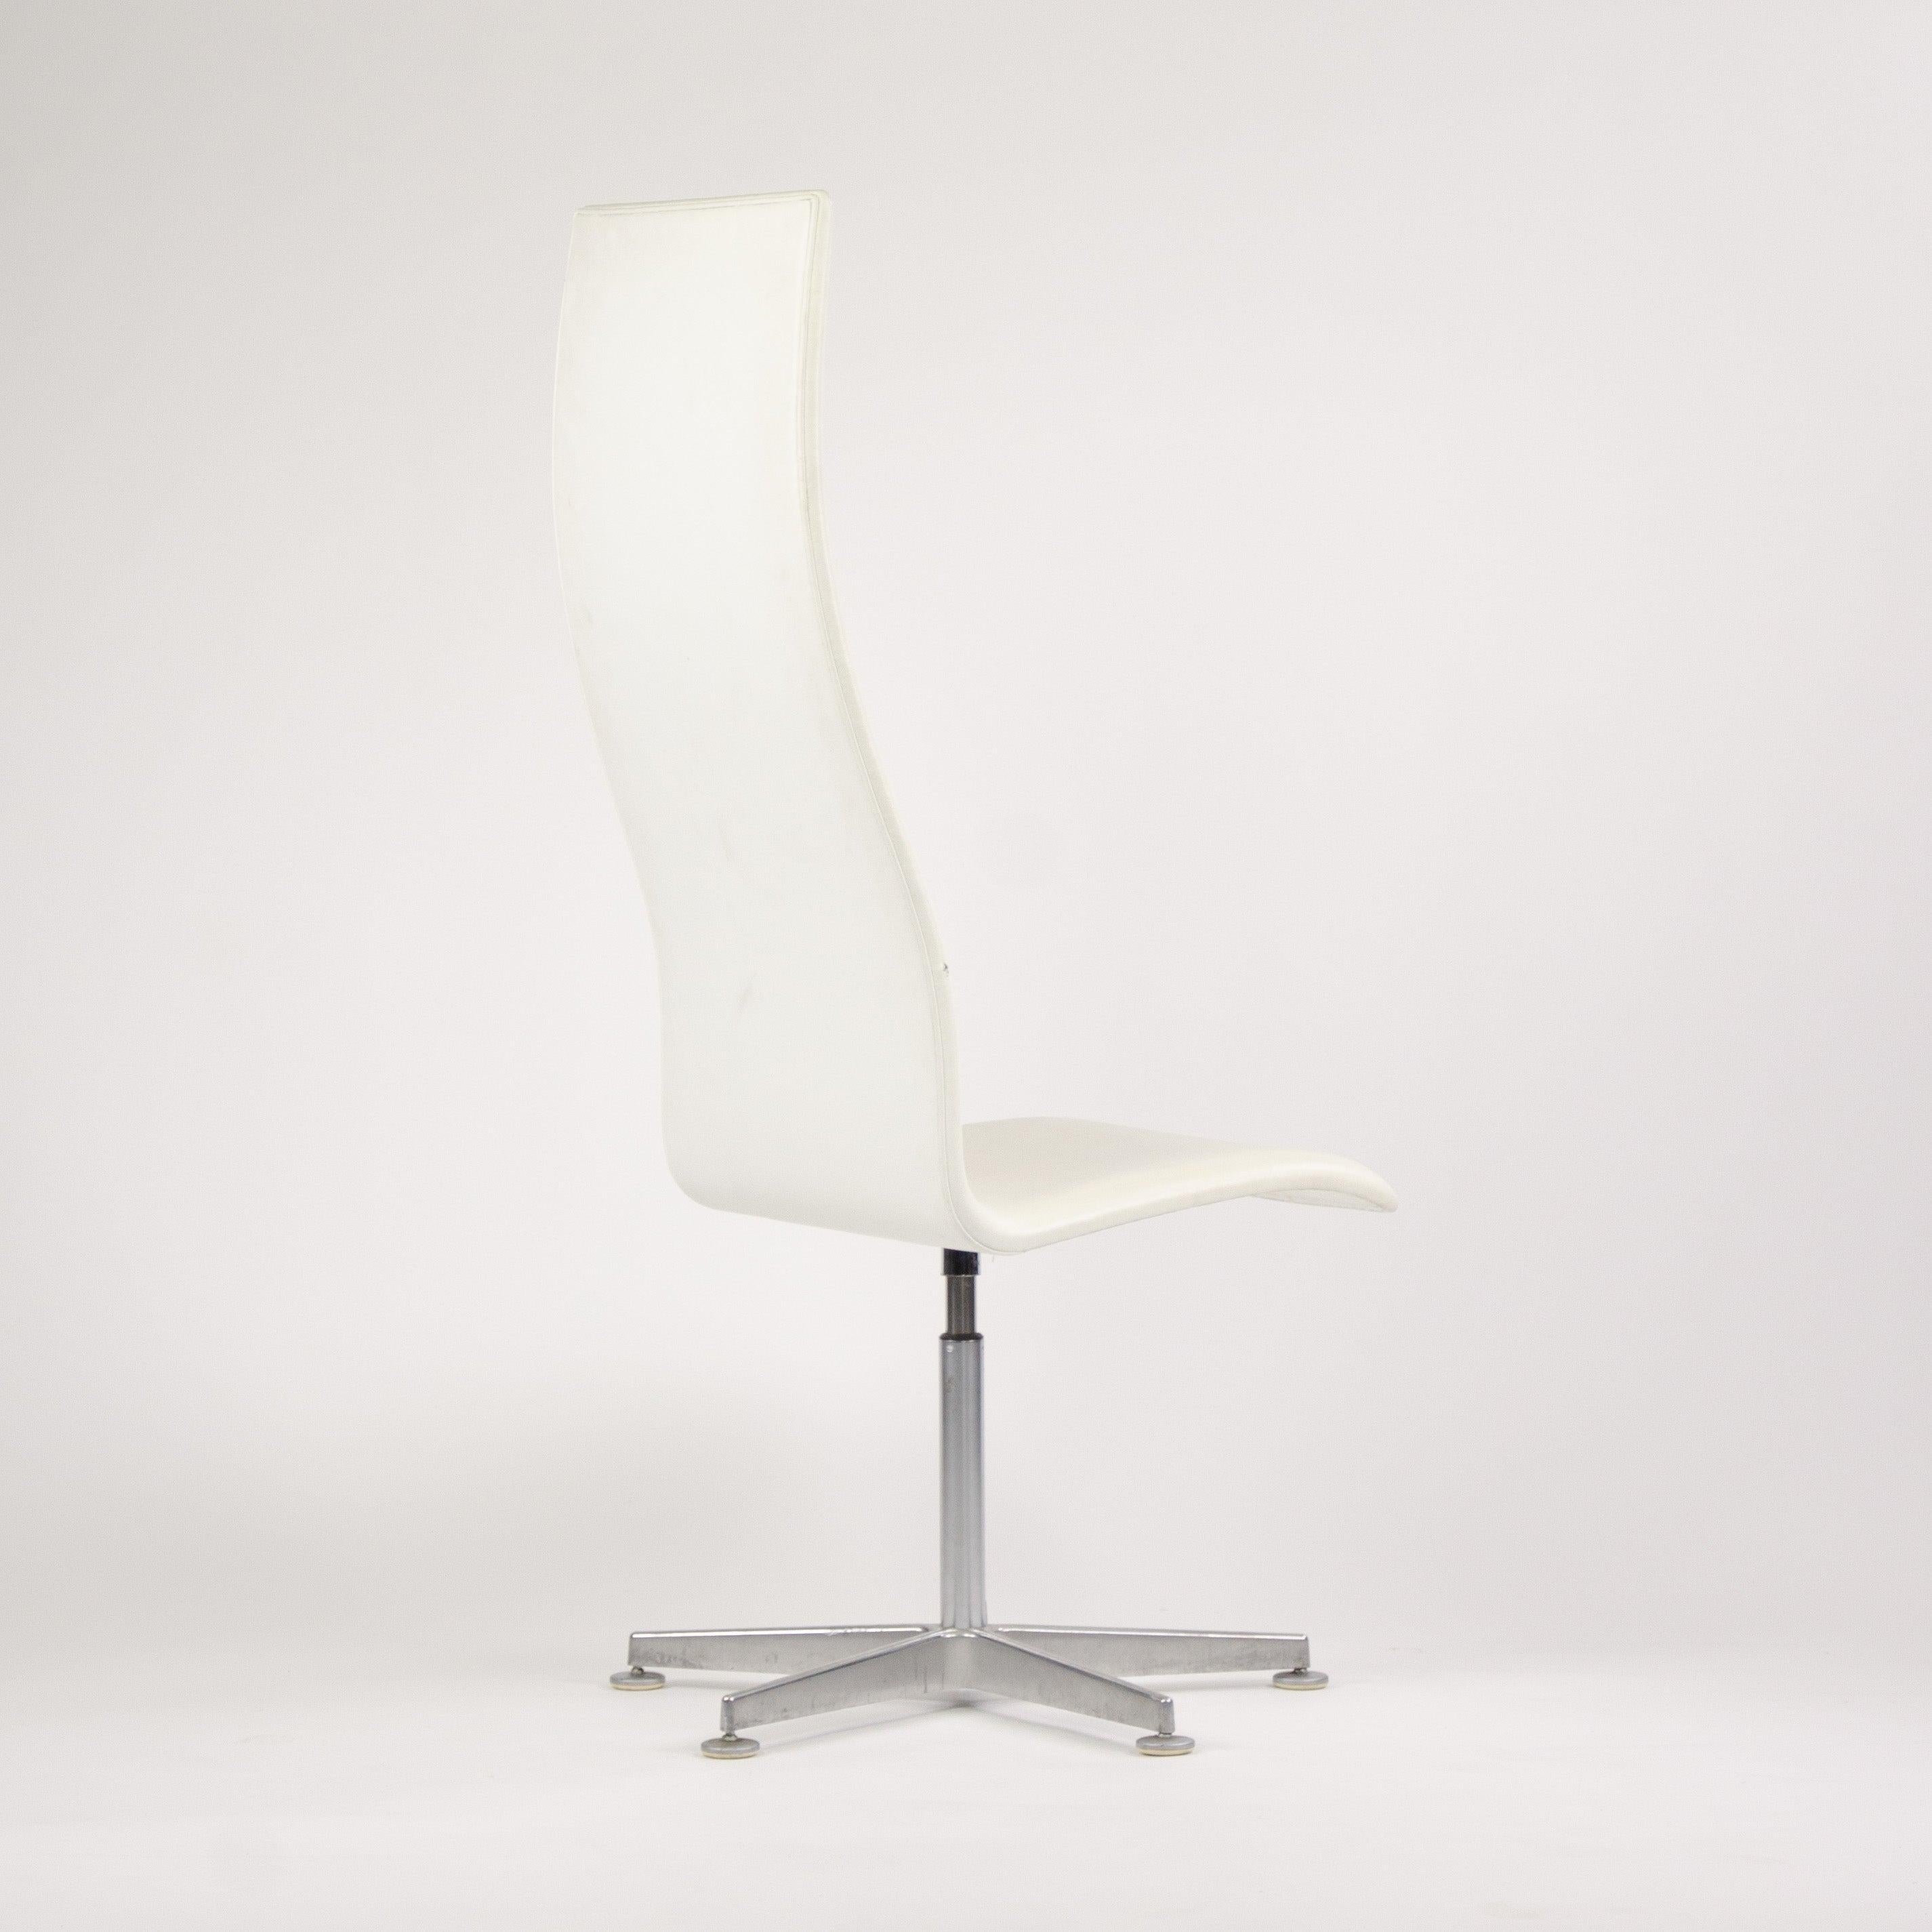 Fritz Hansen Arne Jacobsen Tall Oxford Chair White Leather 2007 4x Available For Sale 1